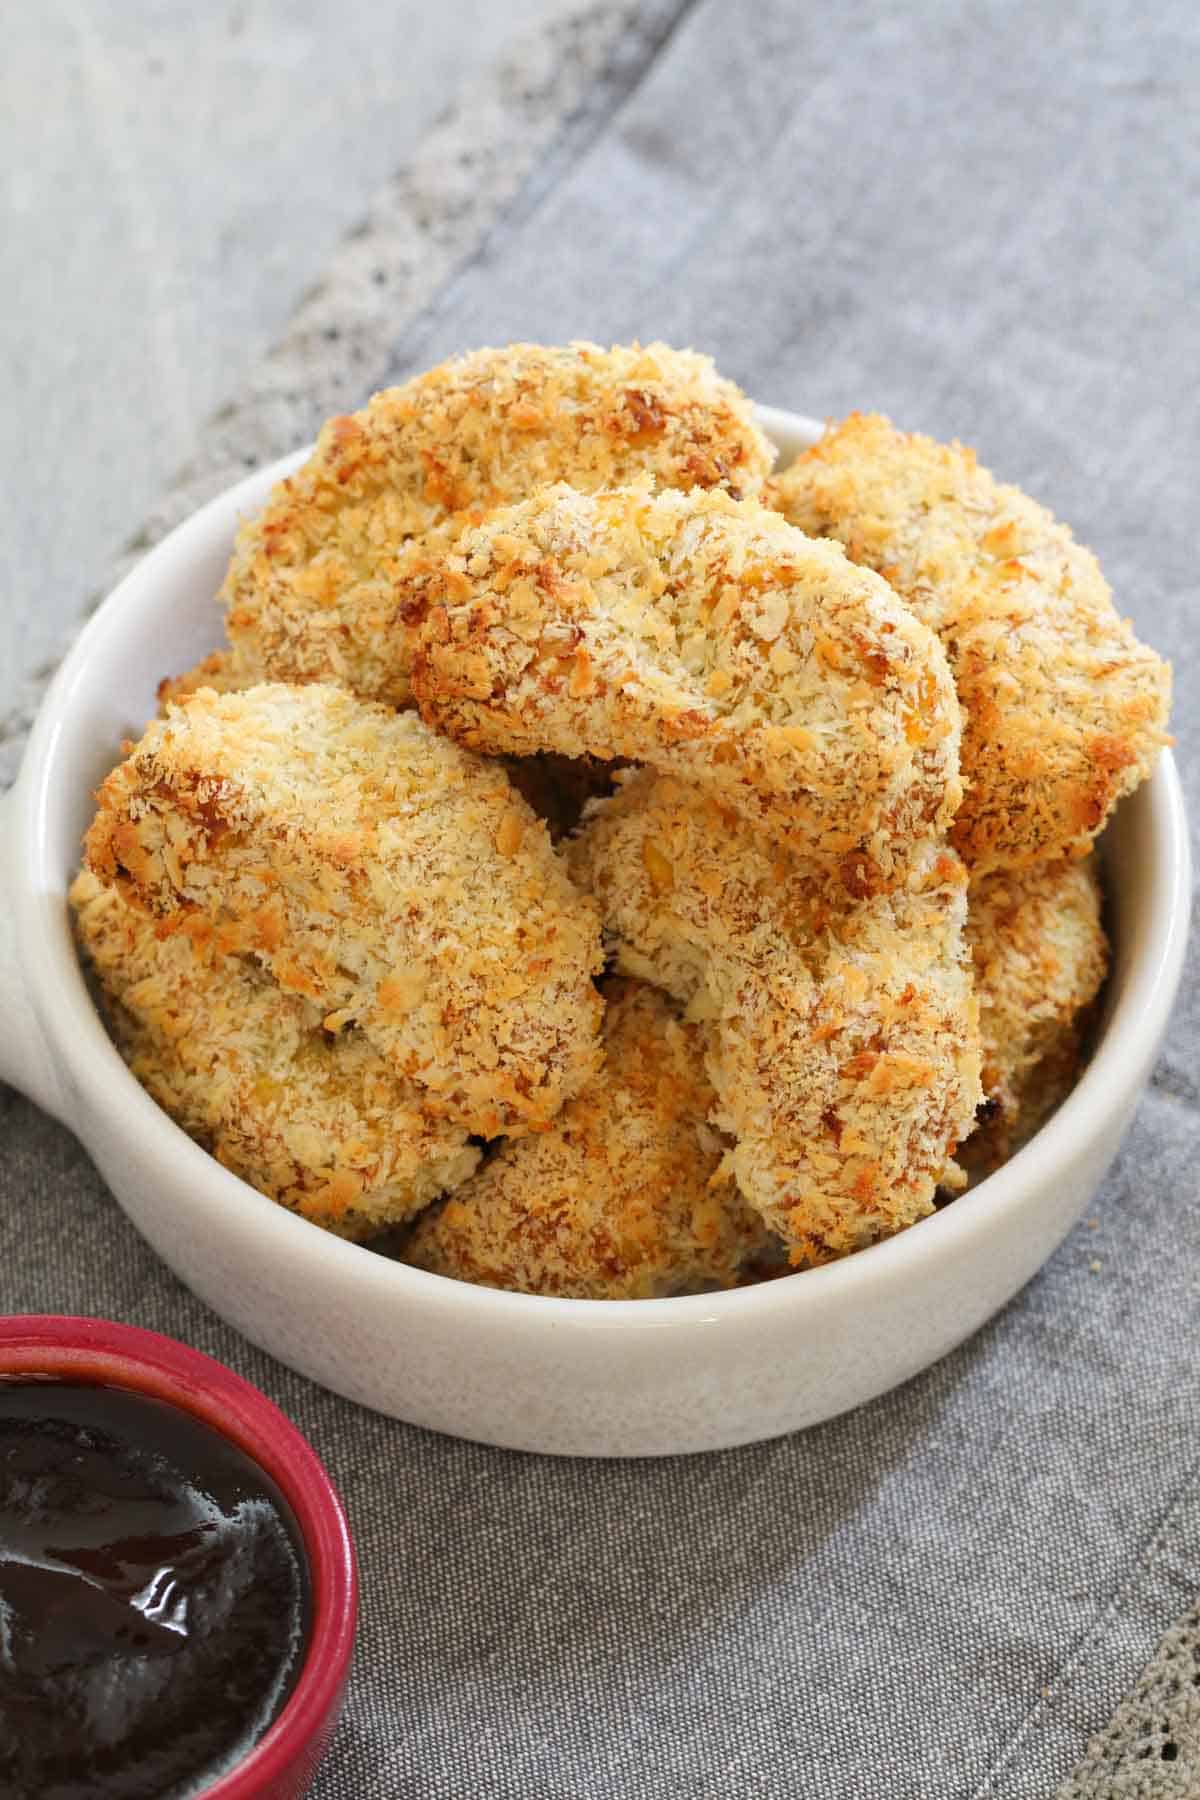 Crumbed veggie nuggets in a white bowl.